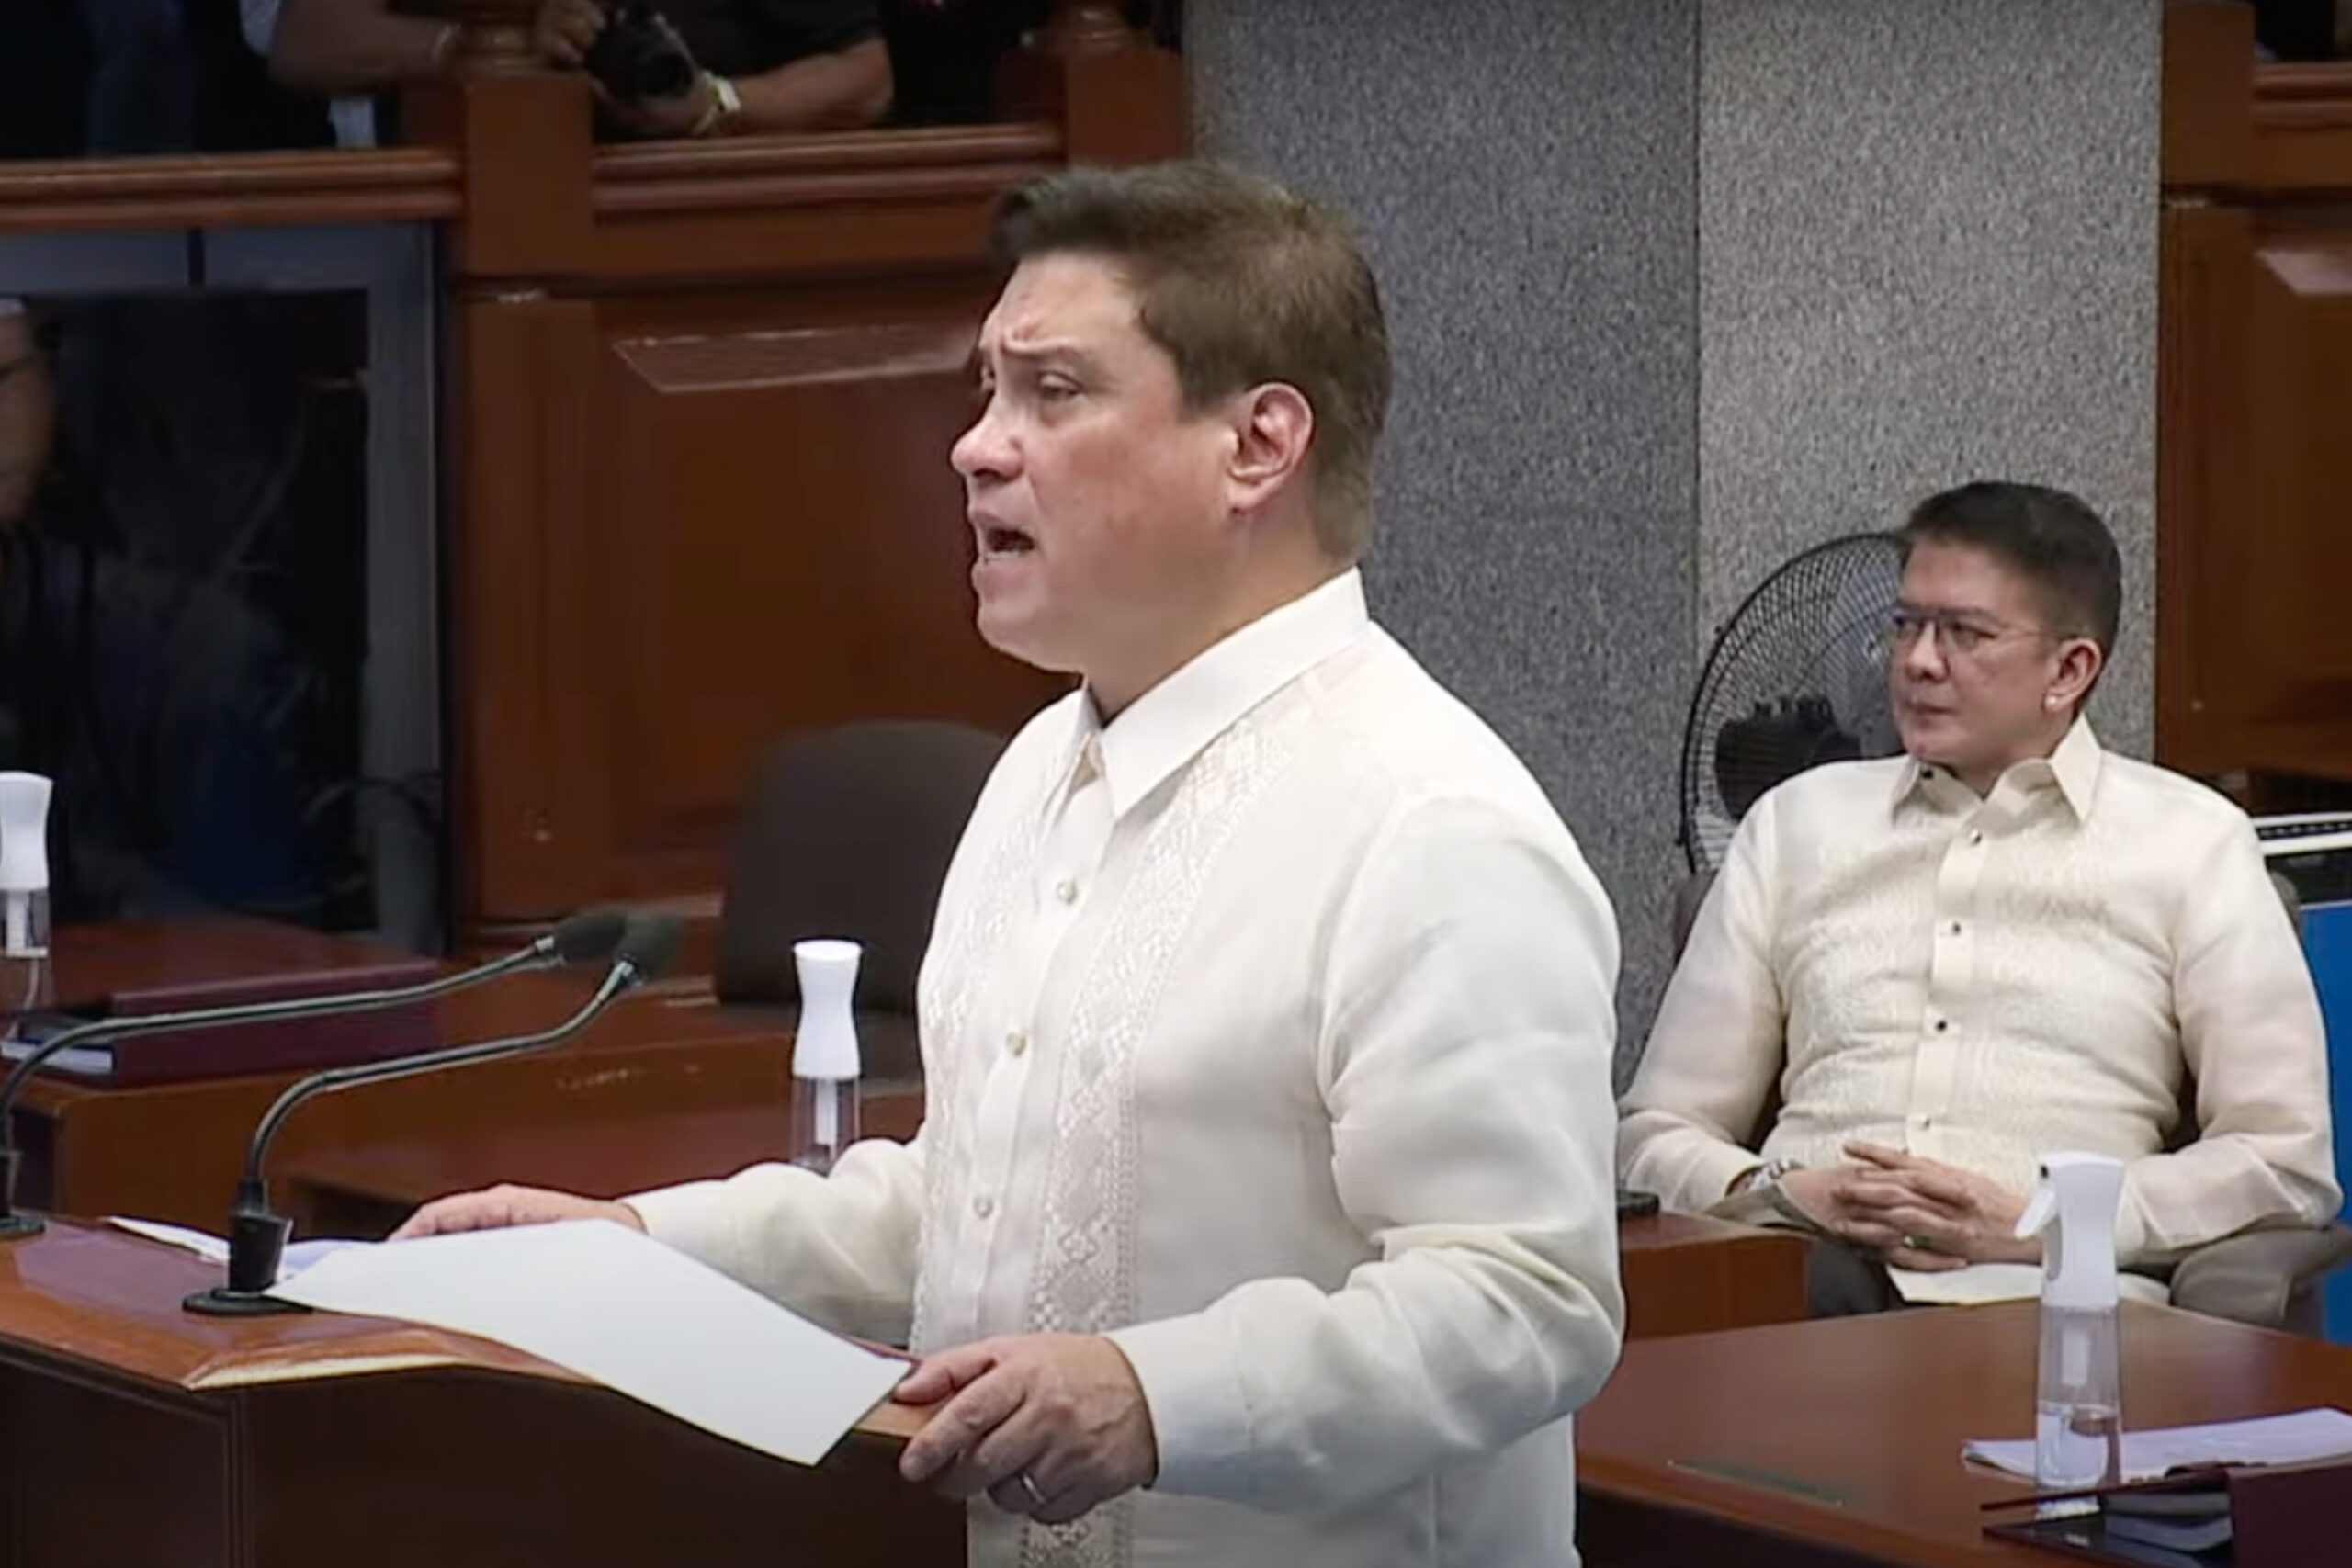 Zubiri ‘dumbfounded’ by Dela Rosa’s vote to oust him